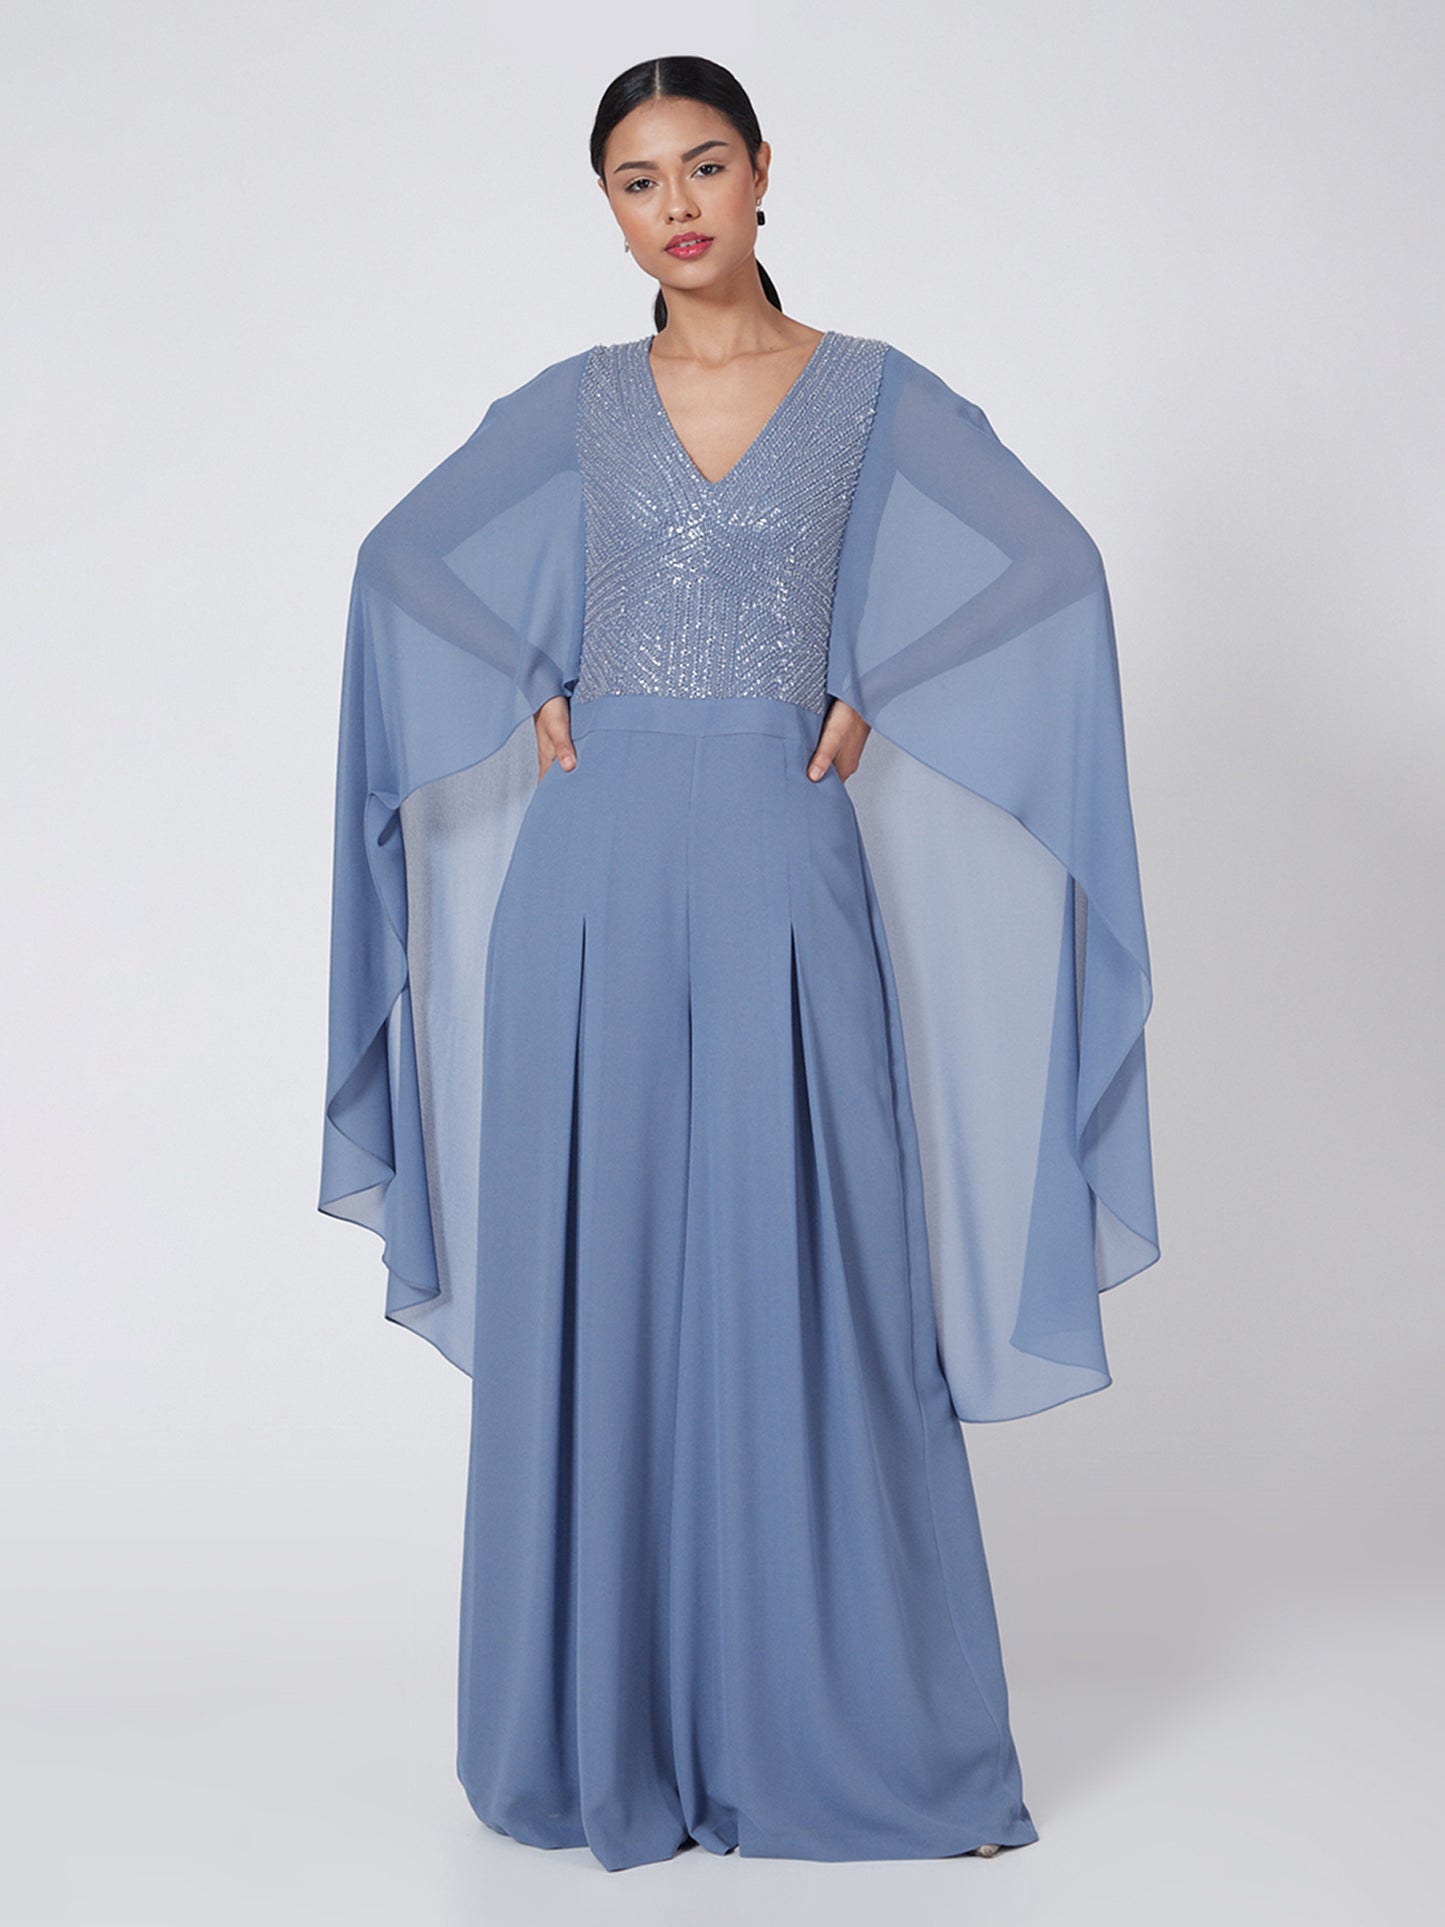 Mystic Blue Jumpsuit In Georgette Base With Cape Sleeves And Bugle And Crystal Embellishment